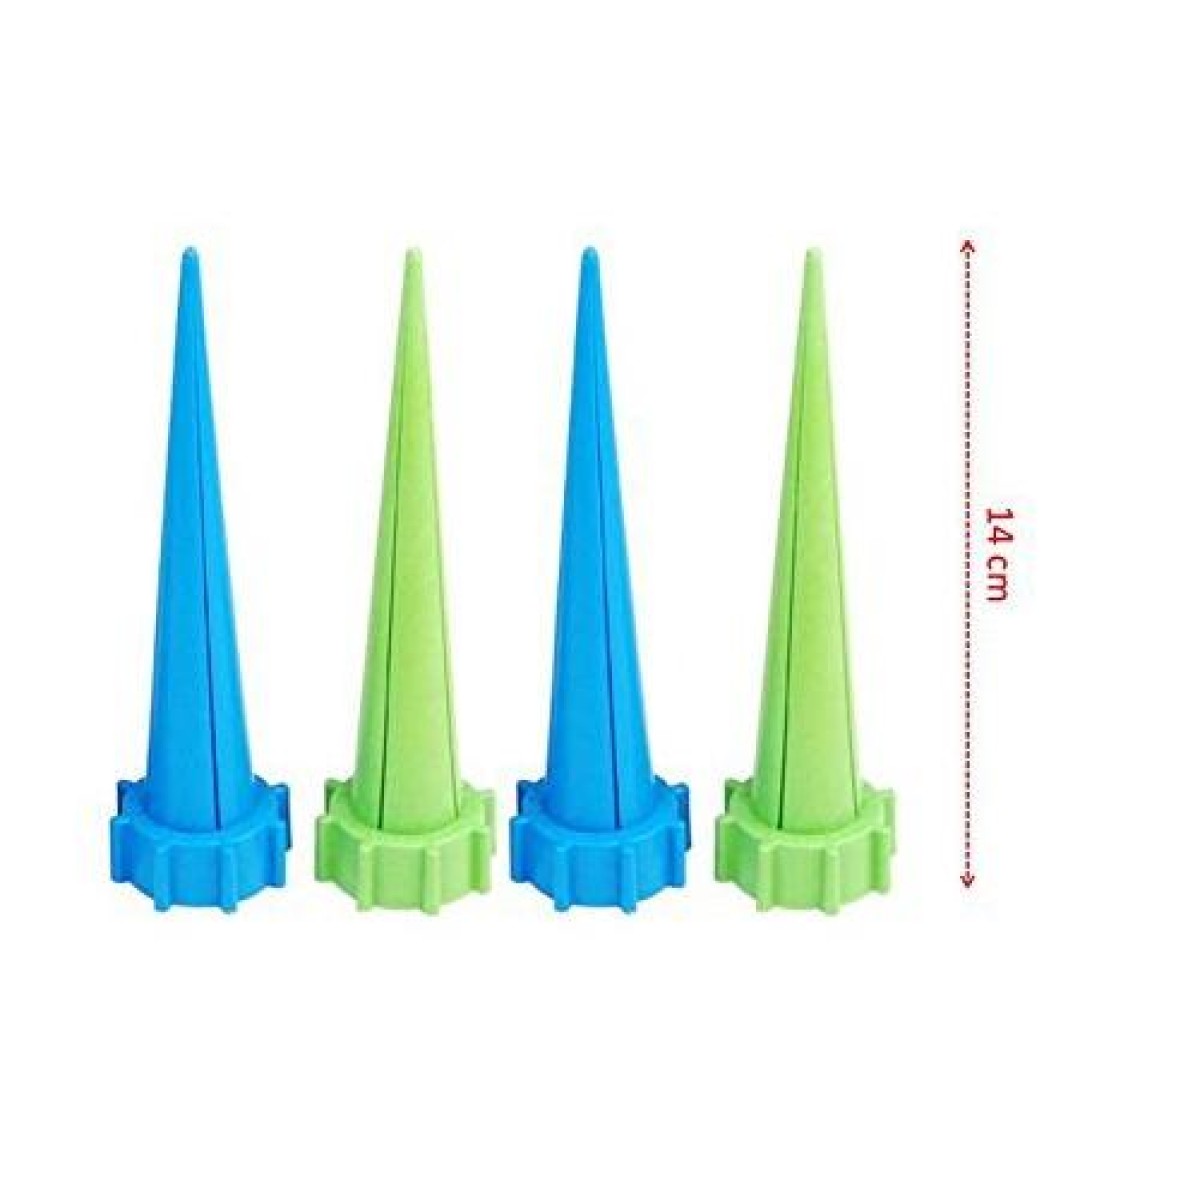 Cone Watering Spike Automatic Watering Irrigation Spike Garden Plant Flower Drip Sprinkler, Random Color Delivery